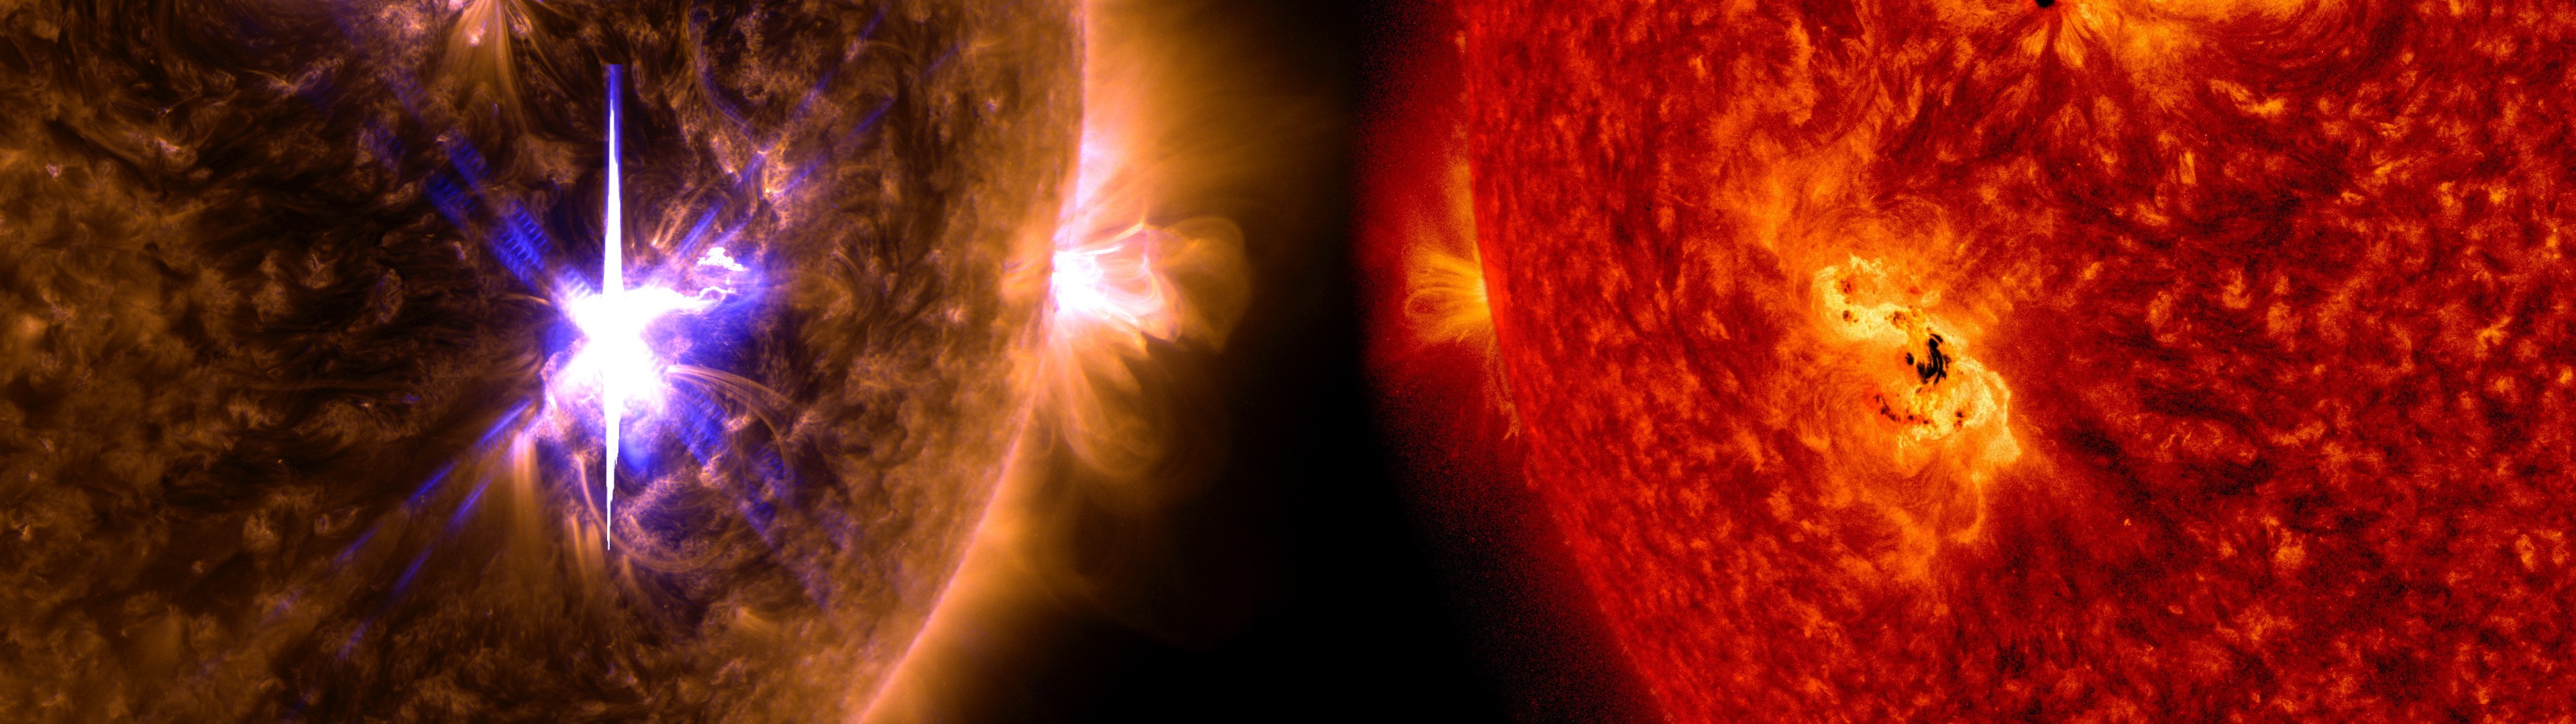 Here's the flare in visible and ultraviolet. Credit: NASA/GSFC/SDO